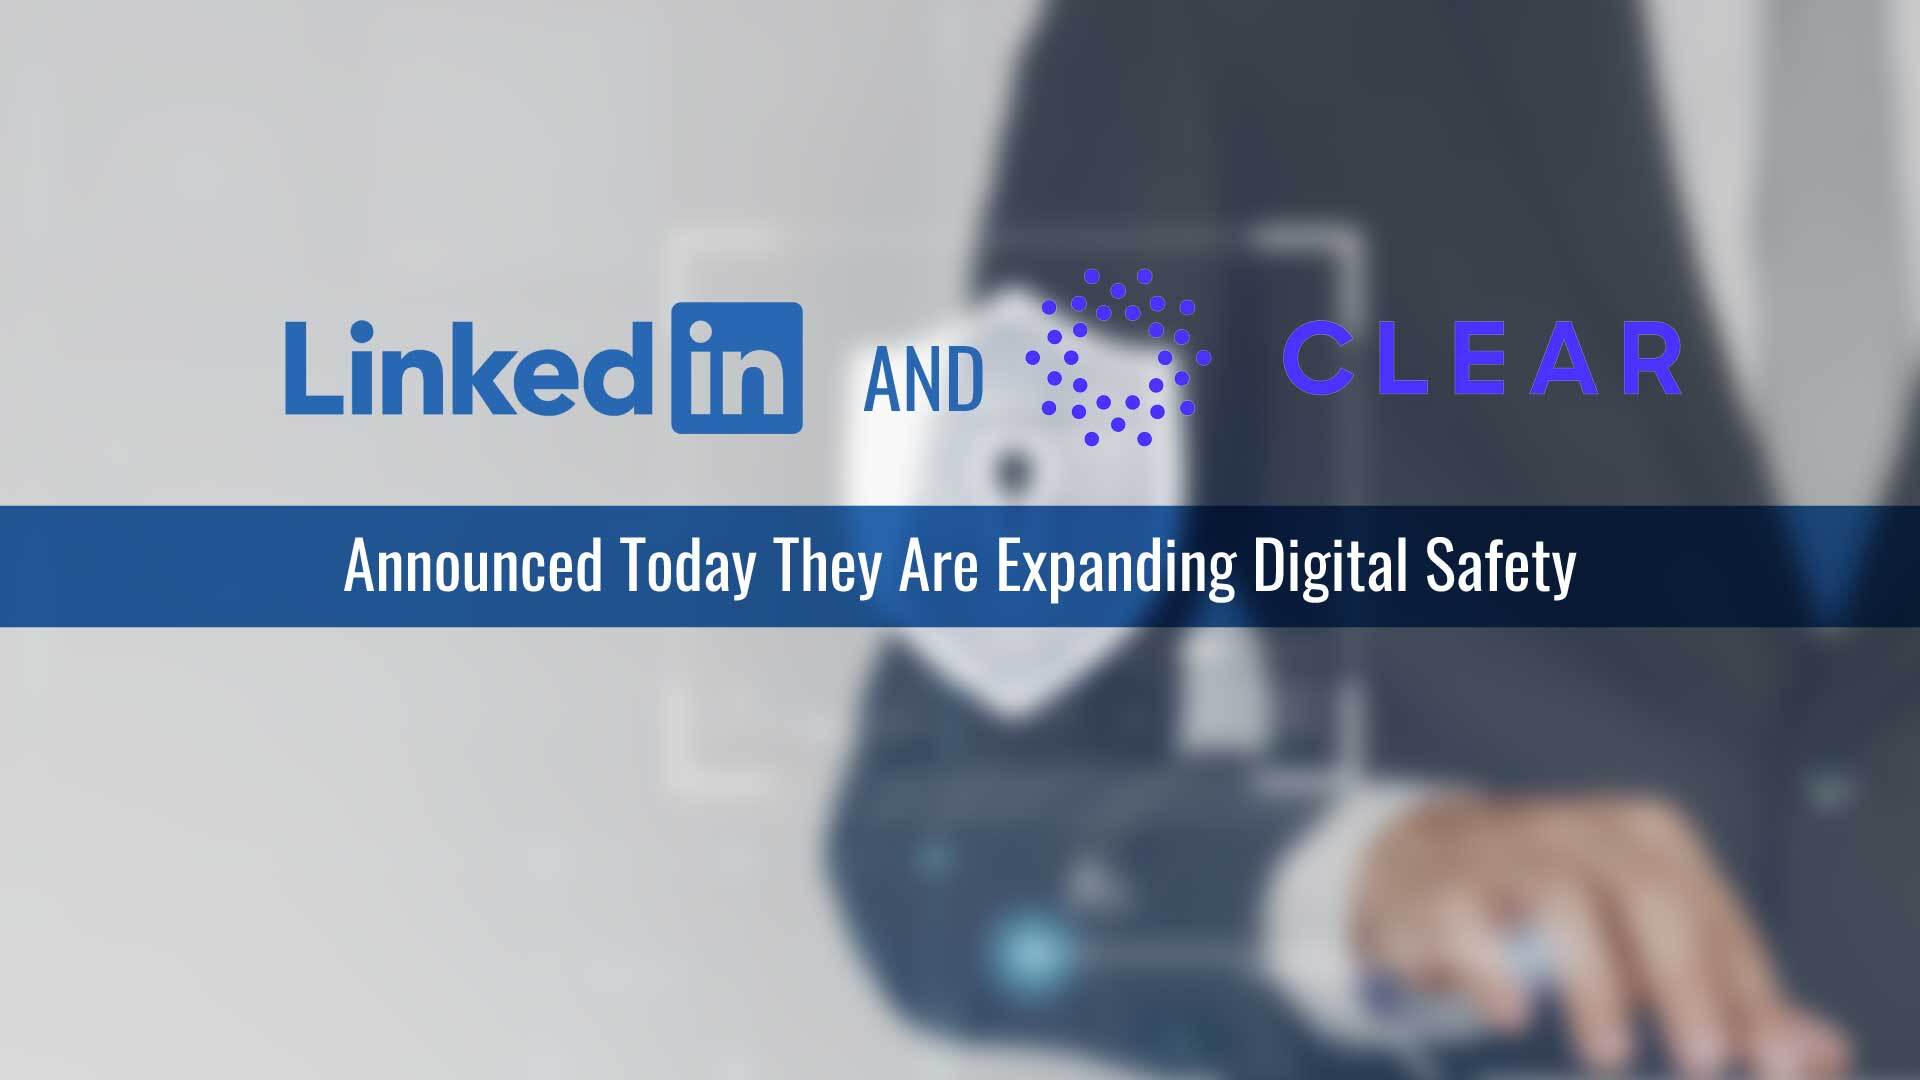 LinkedIn and CLEAR Continue to Enhance Digital Safety, Expand Free Identity Verification to Canada's LinkedIn Users